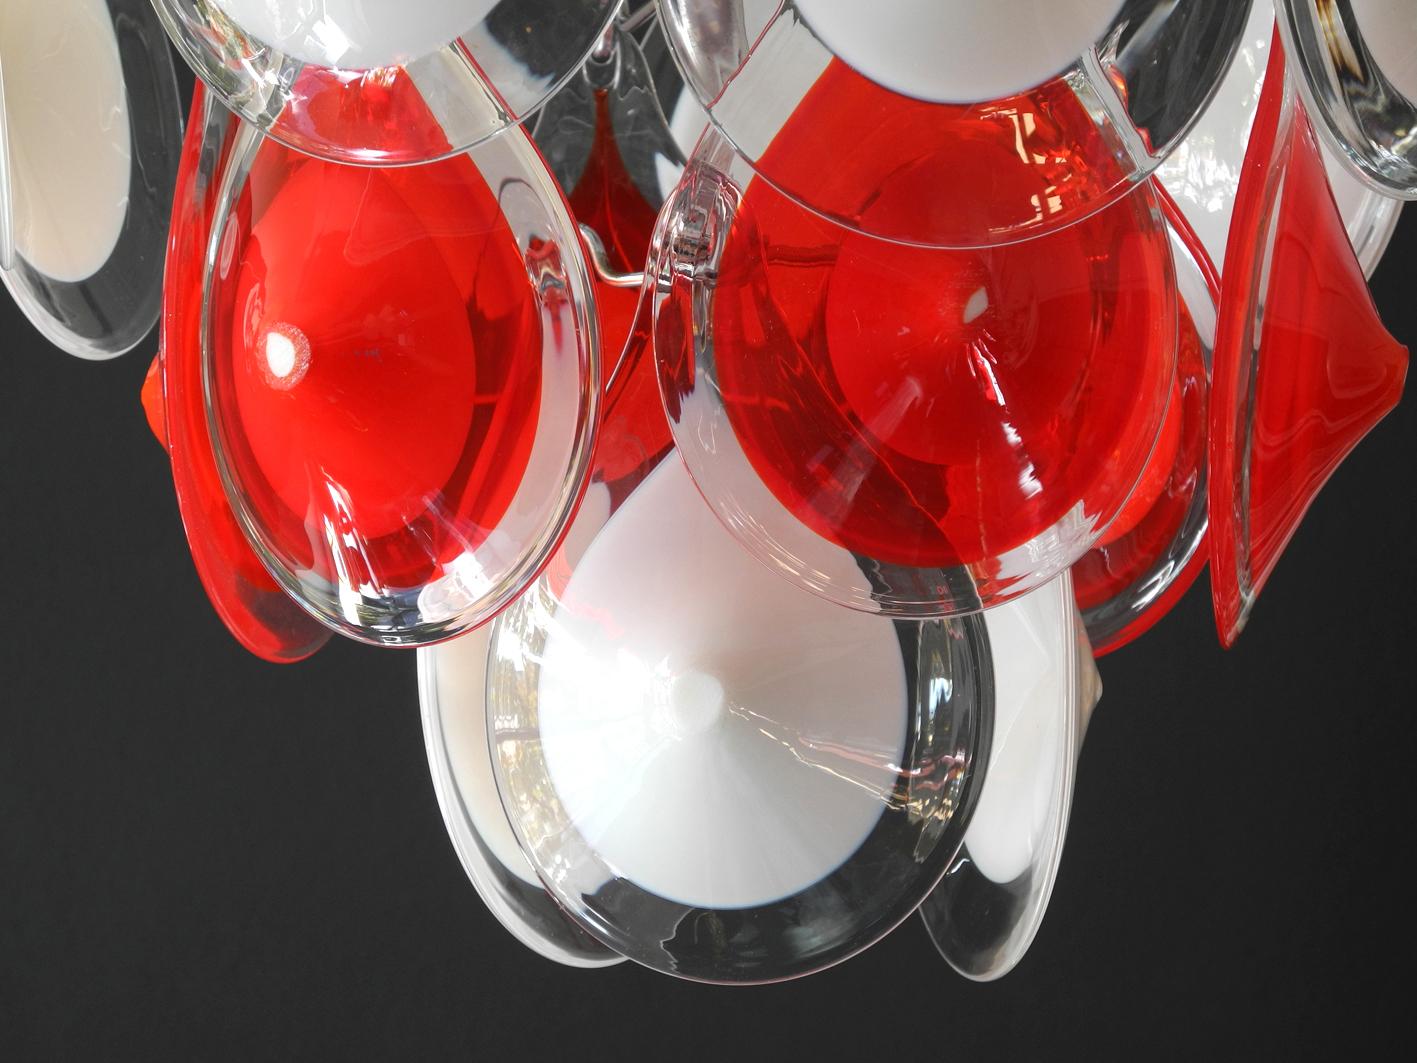 Beautiful Original 1960s Vistosi Chandelier with White and Red Murano Glas Drops 2